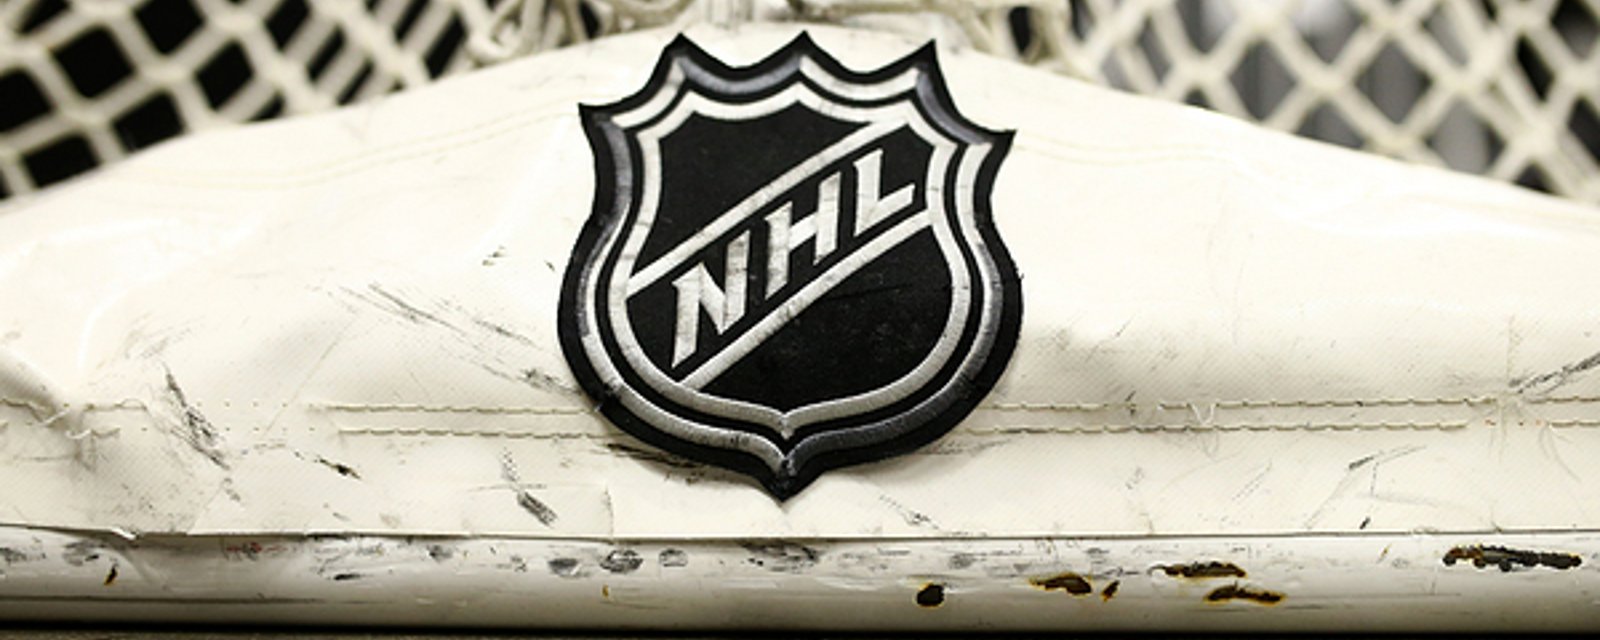 NHL to make big announcement this weekend